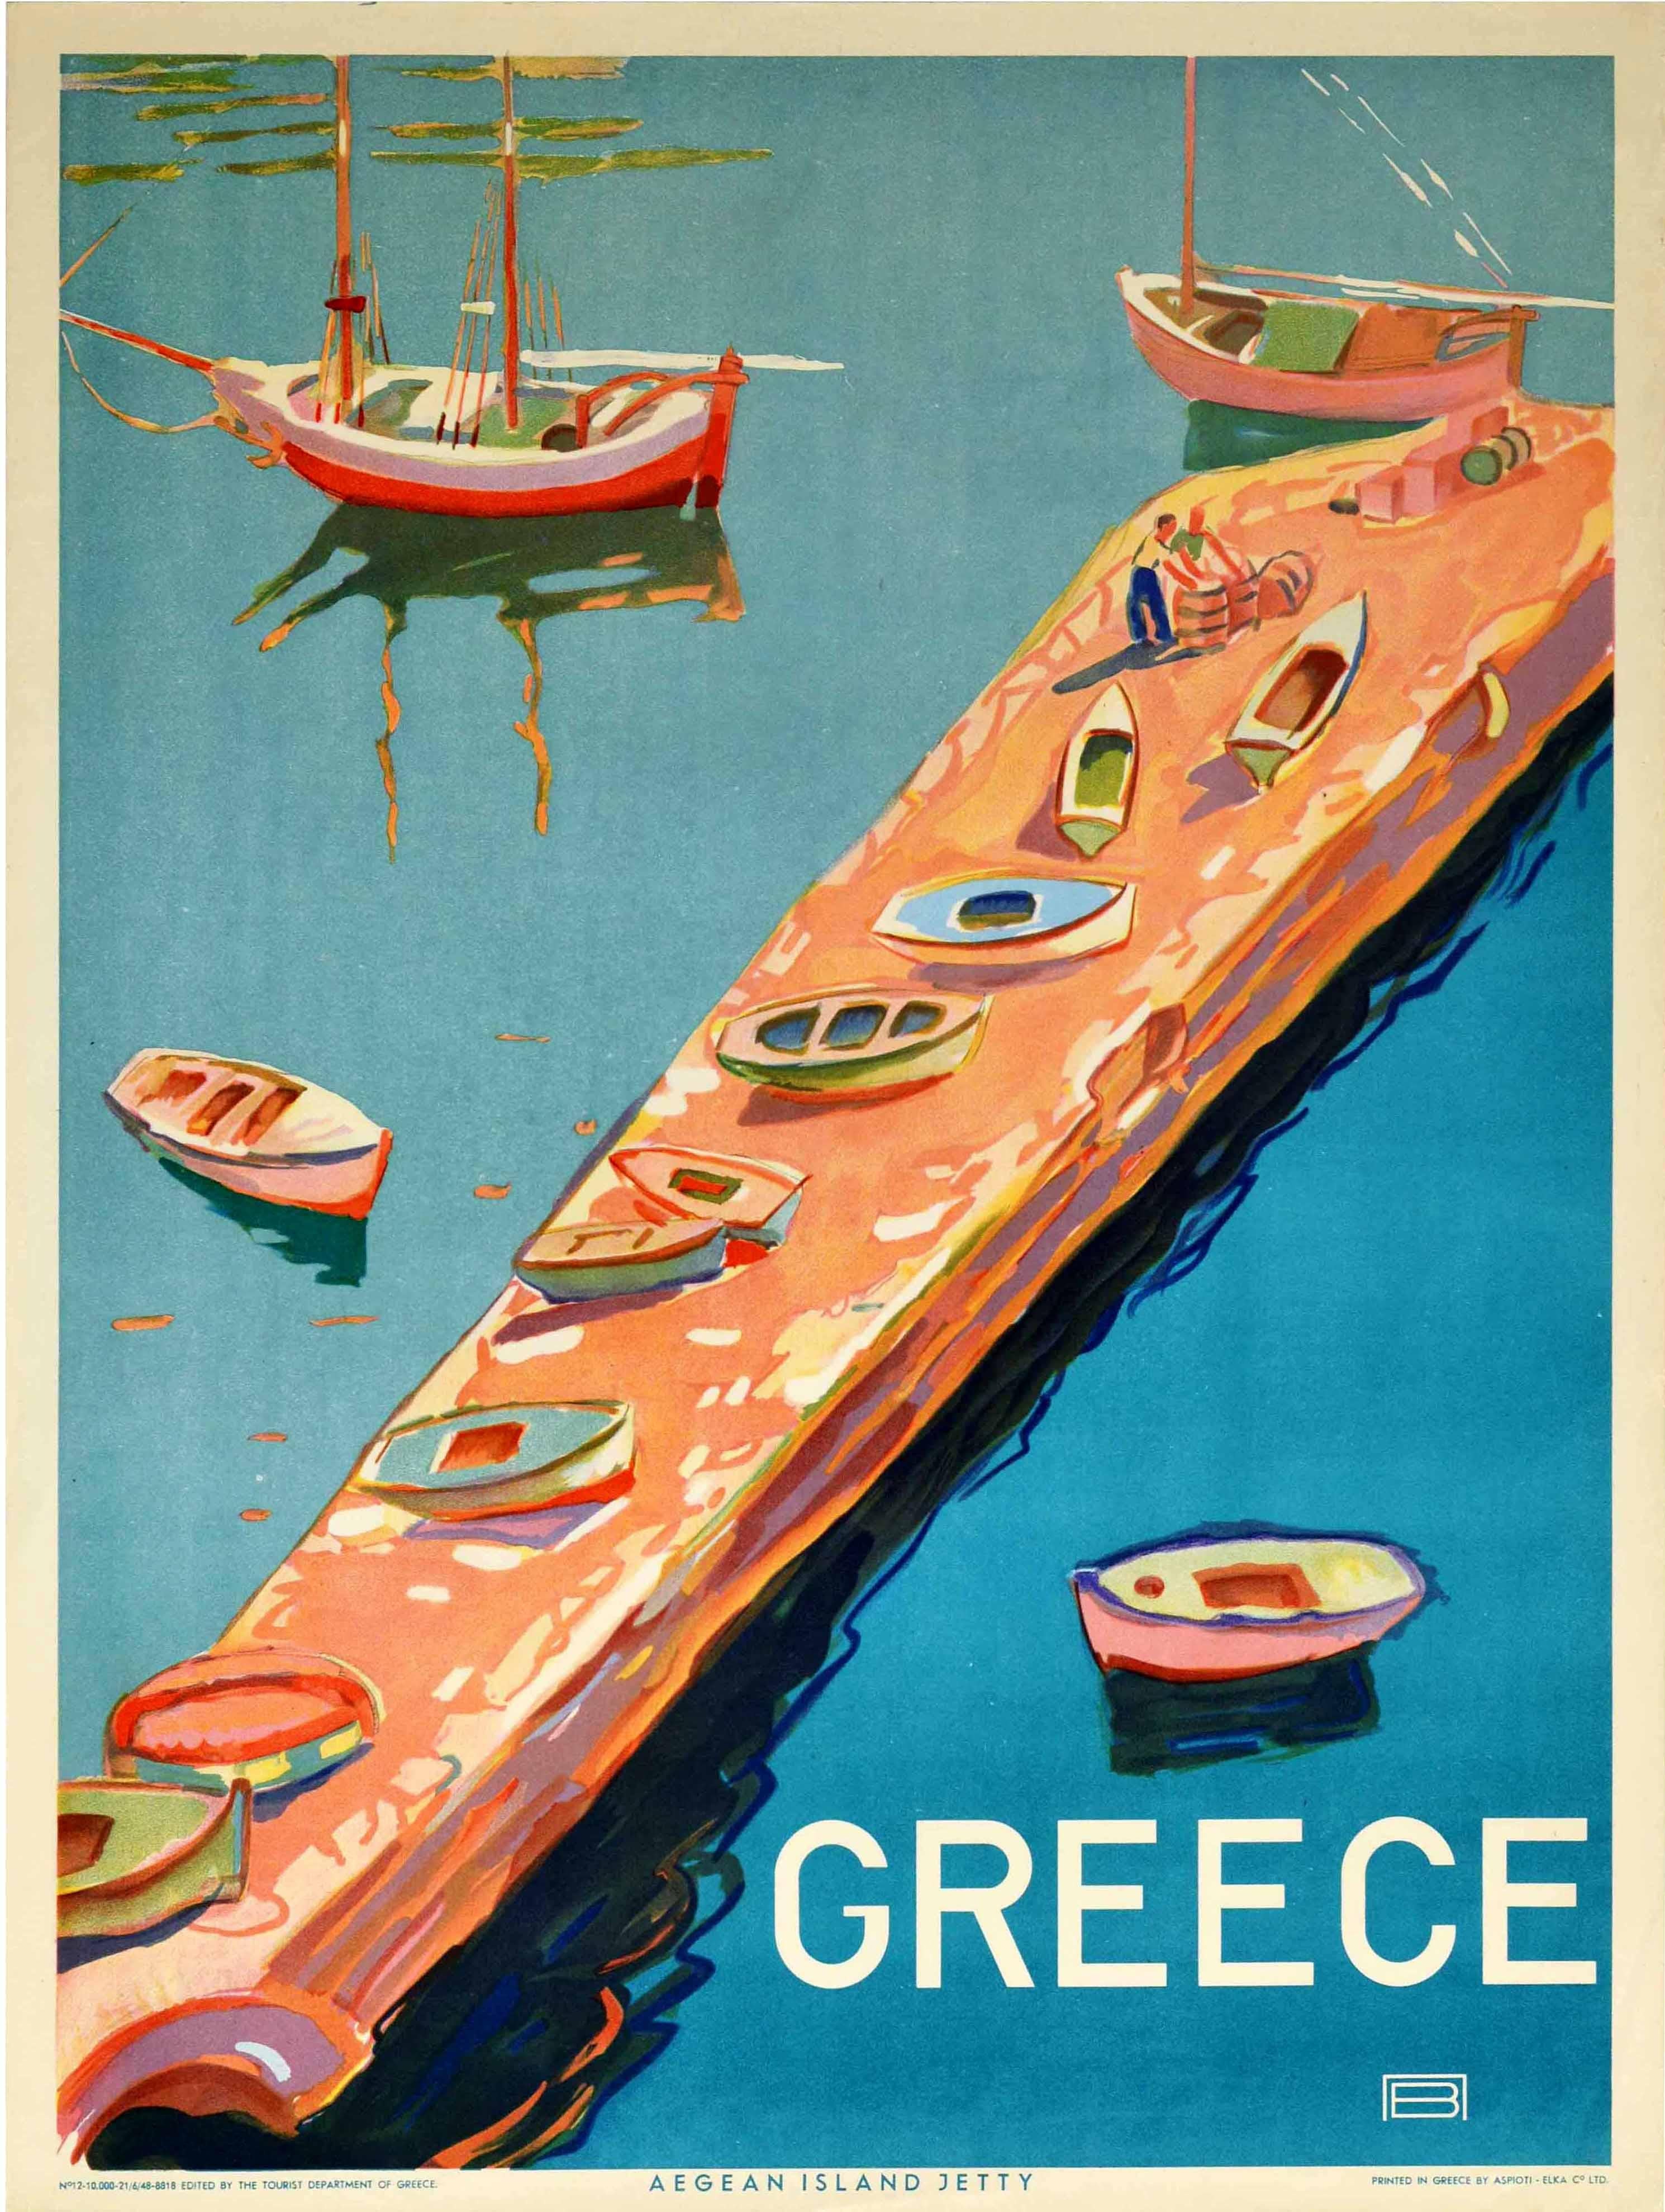 Unknown Print - Original Vintage Travel Poster Greece Aegean Island Jetty View Sailing Boats Sea